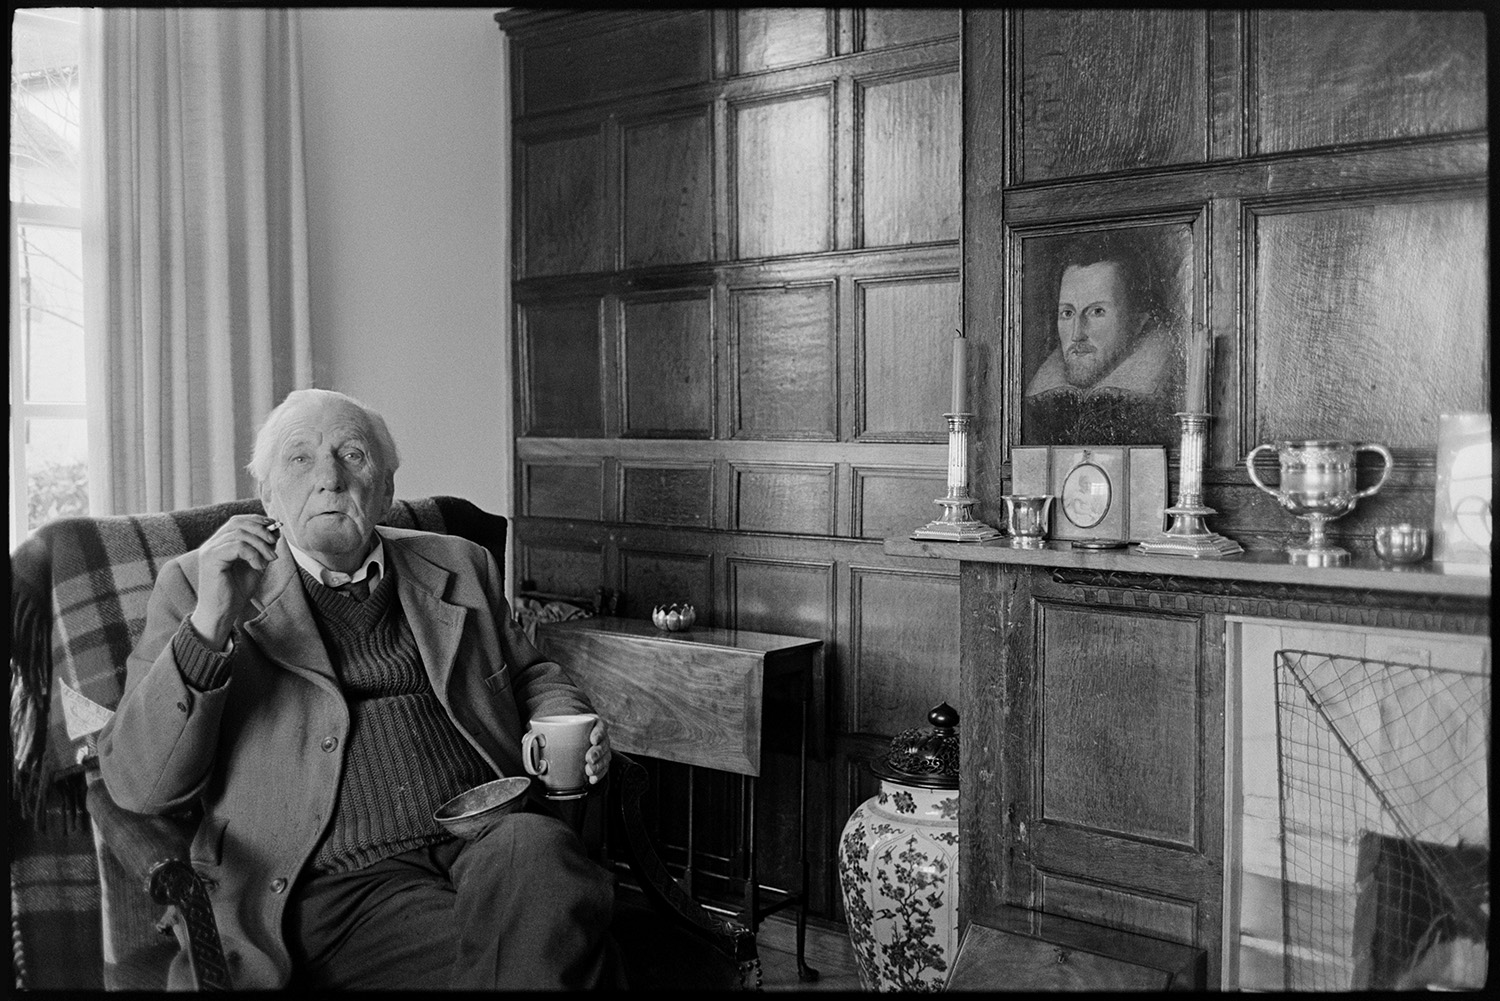 Man and woman seated, furniture, panelled screen. <br />
[Michael Davis, a retired solicitor, sitting in a chair by a fireplace at his house in Dolton. He is smoking a cigarette and holding a mug. The room has wooden panelling, and one of the panels contains a portrait of a man. Candlesticks and silverware are on display on the mantelpiece.]